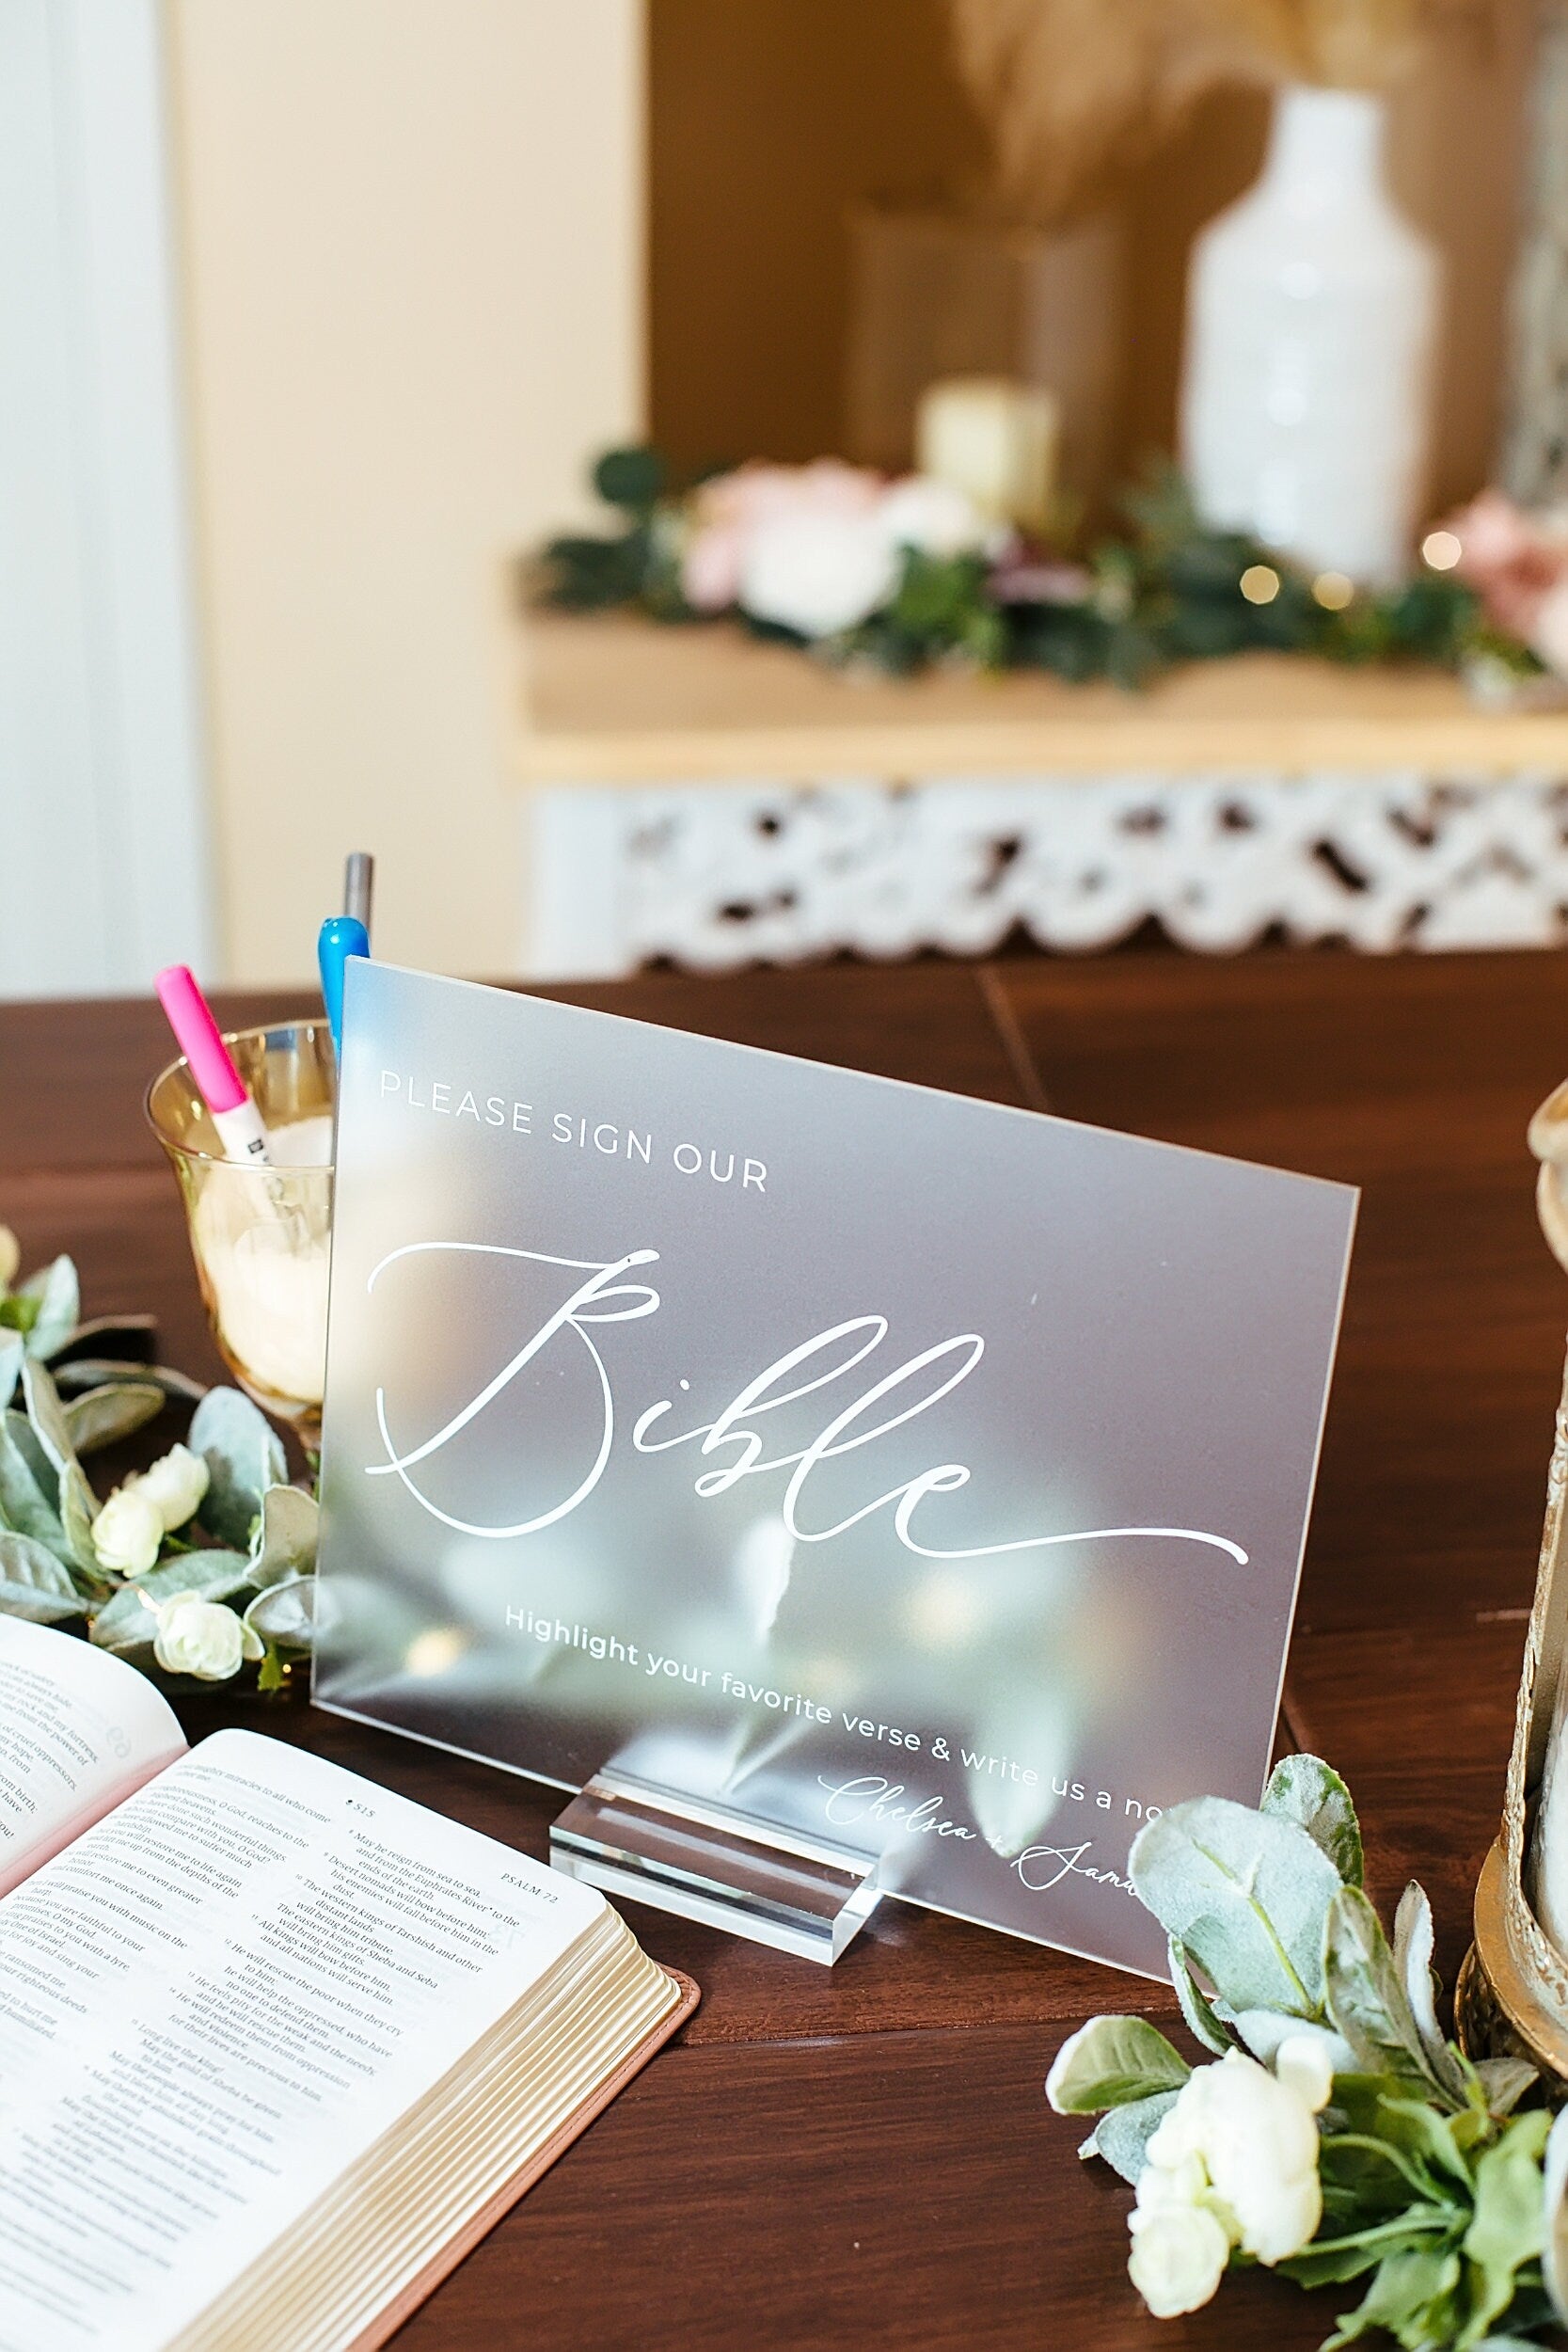 Please Sign Our Bible And Highlight Your Favorite Bible Verse Clear Glass Look Acrylic Minimalist Wedding Guest Book Sign, Lucite Plexiglass